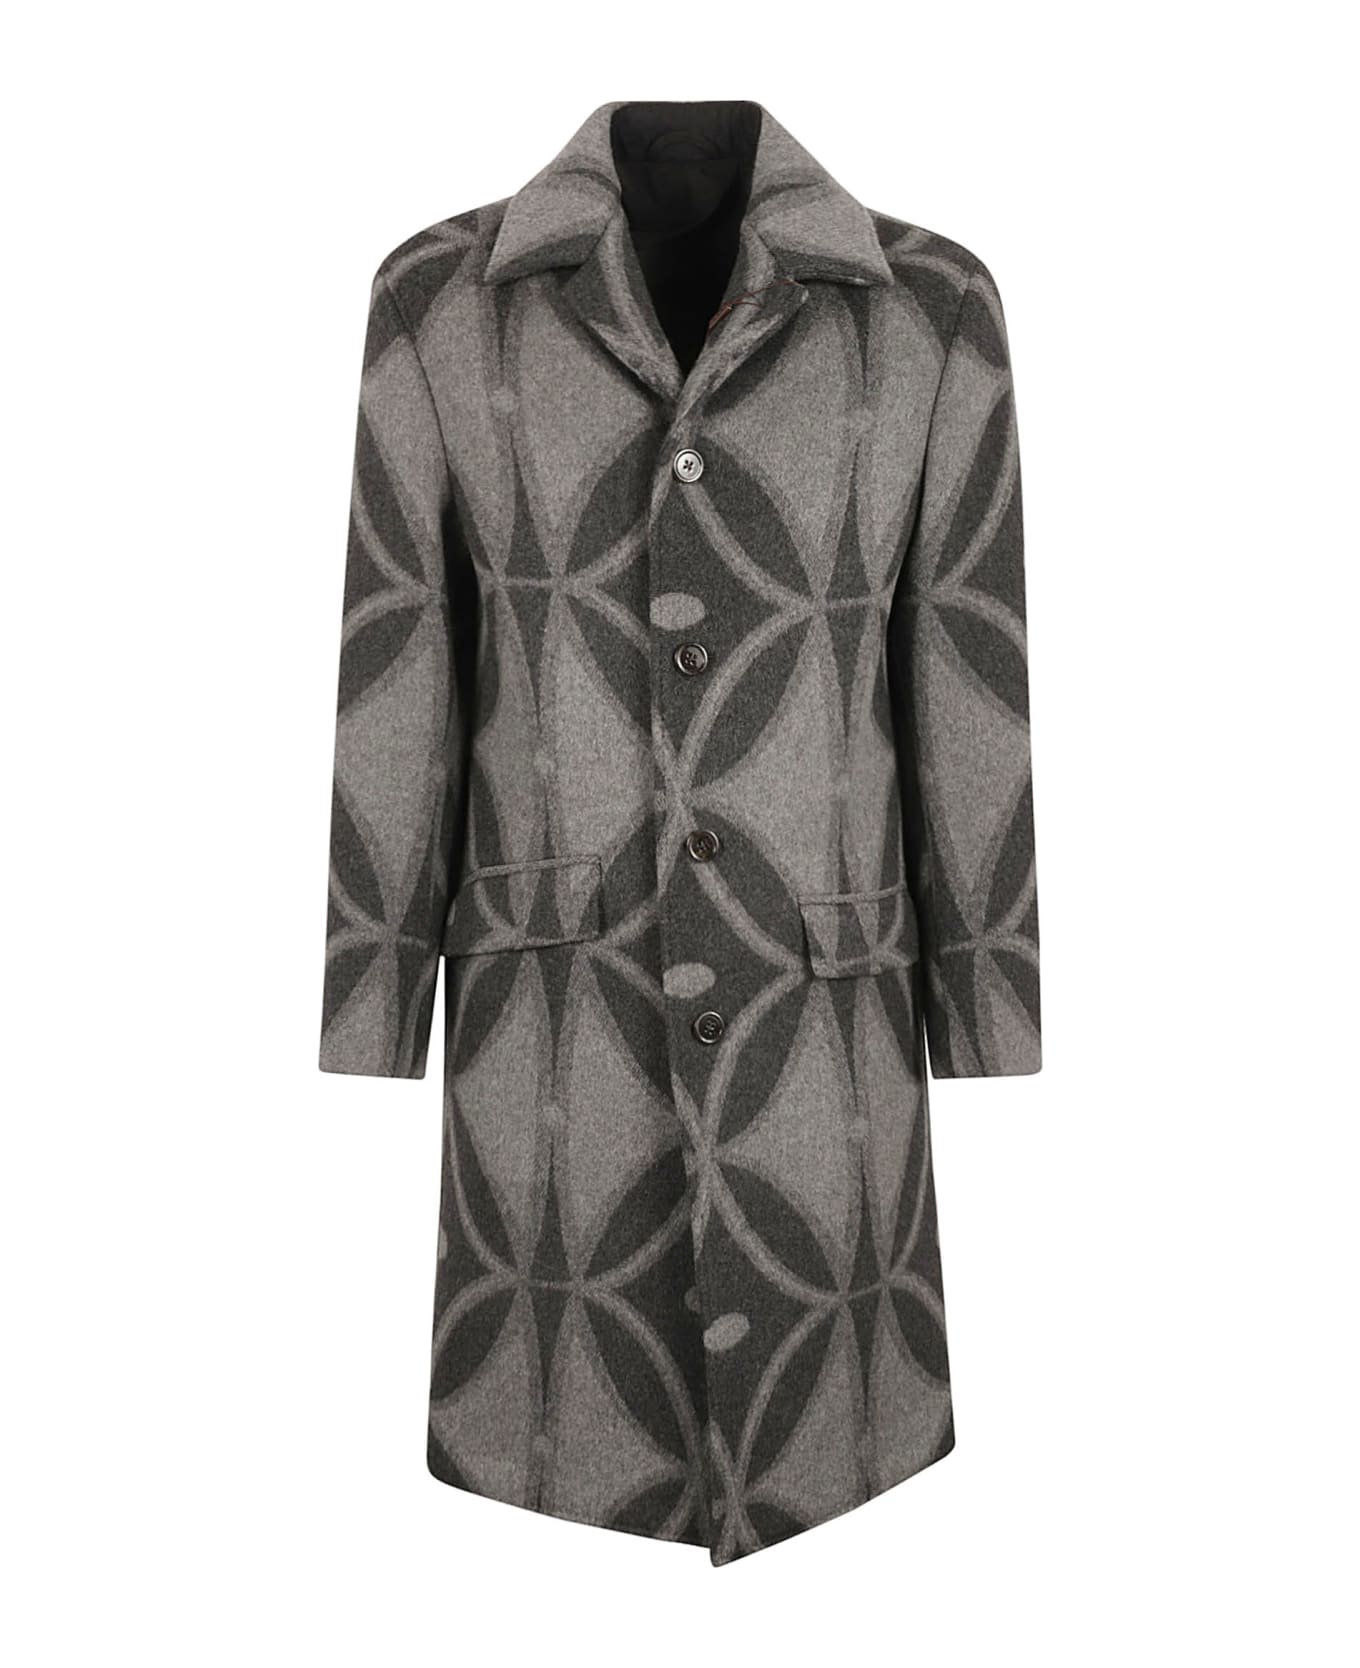 Etro Patterned Button-up Coat - Grey